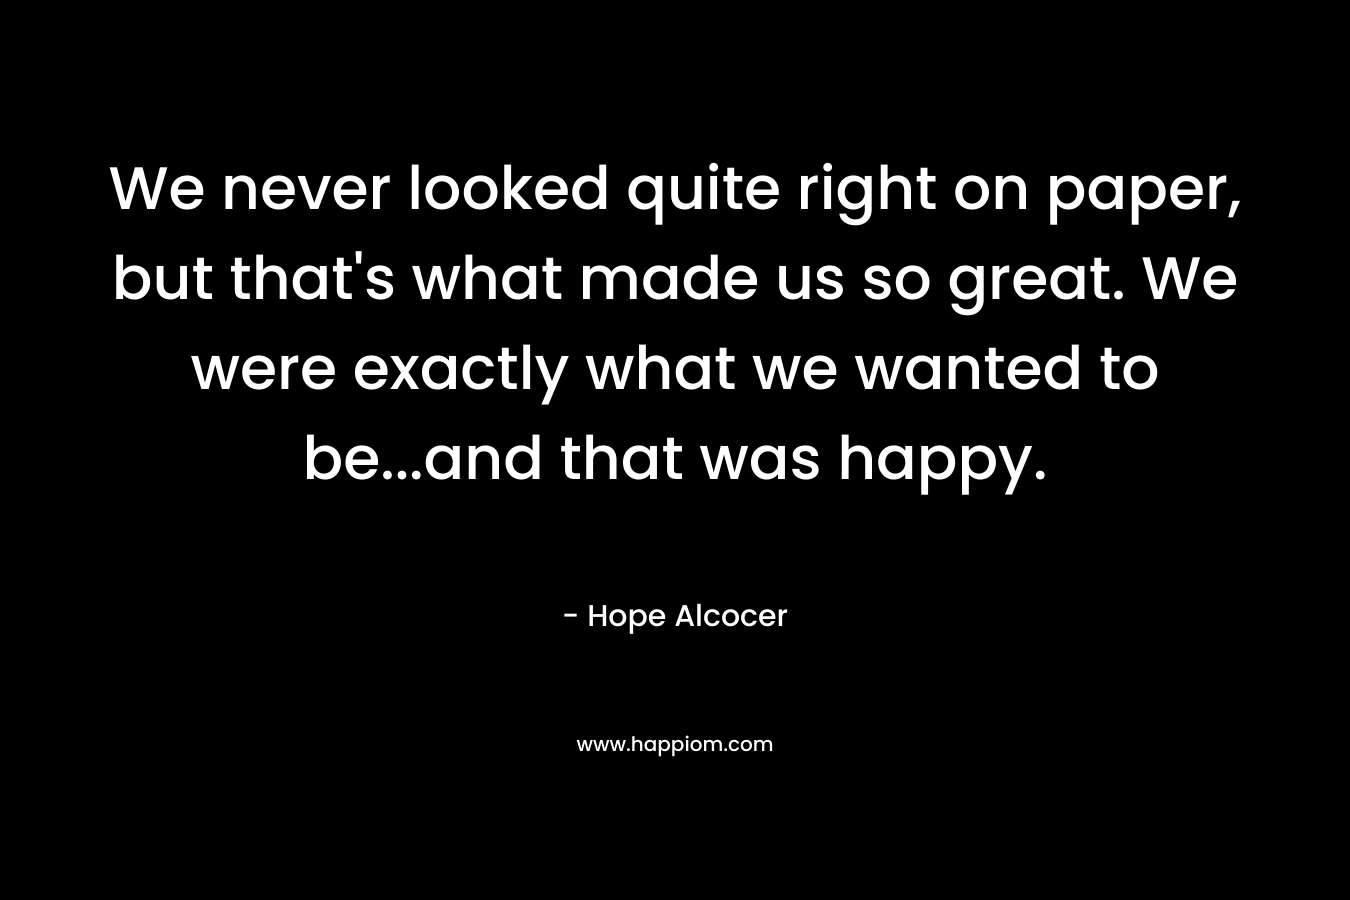 We never looked quite right on paper, but that’s what made us so great. We were exactly what we wanted to be…and that was happy. – Hope Alcocer